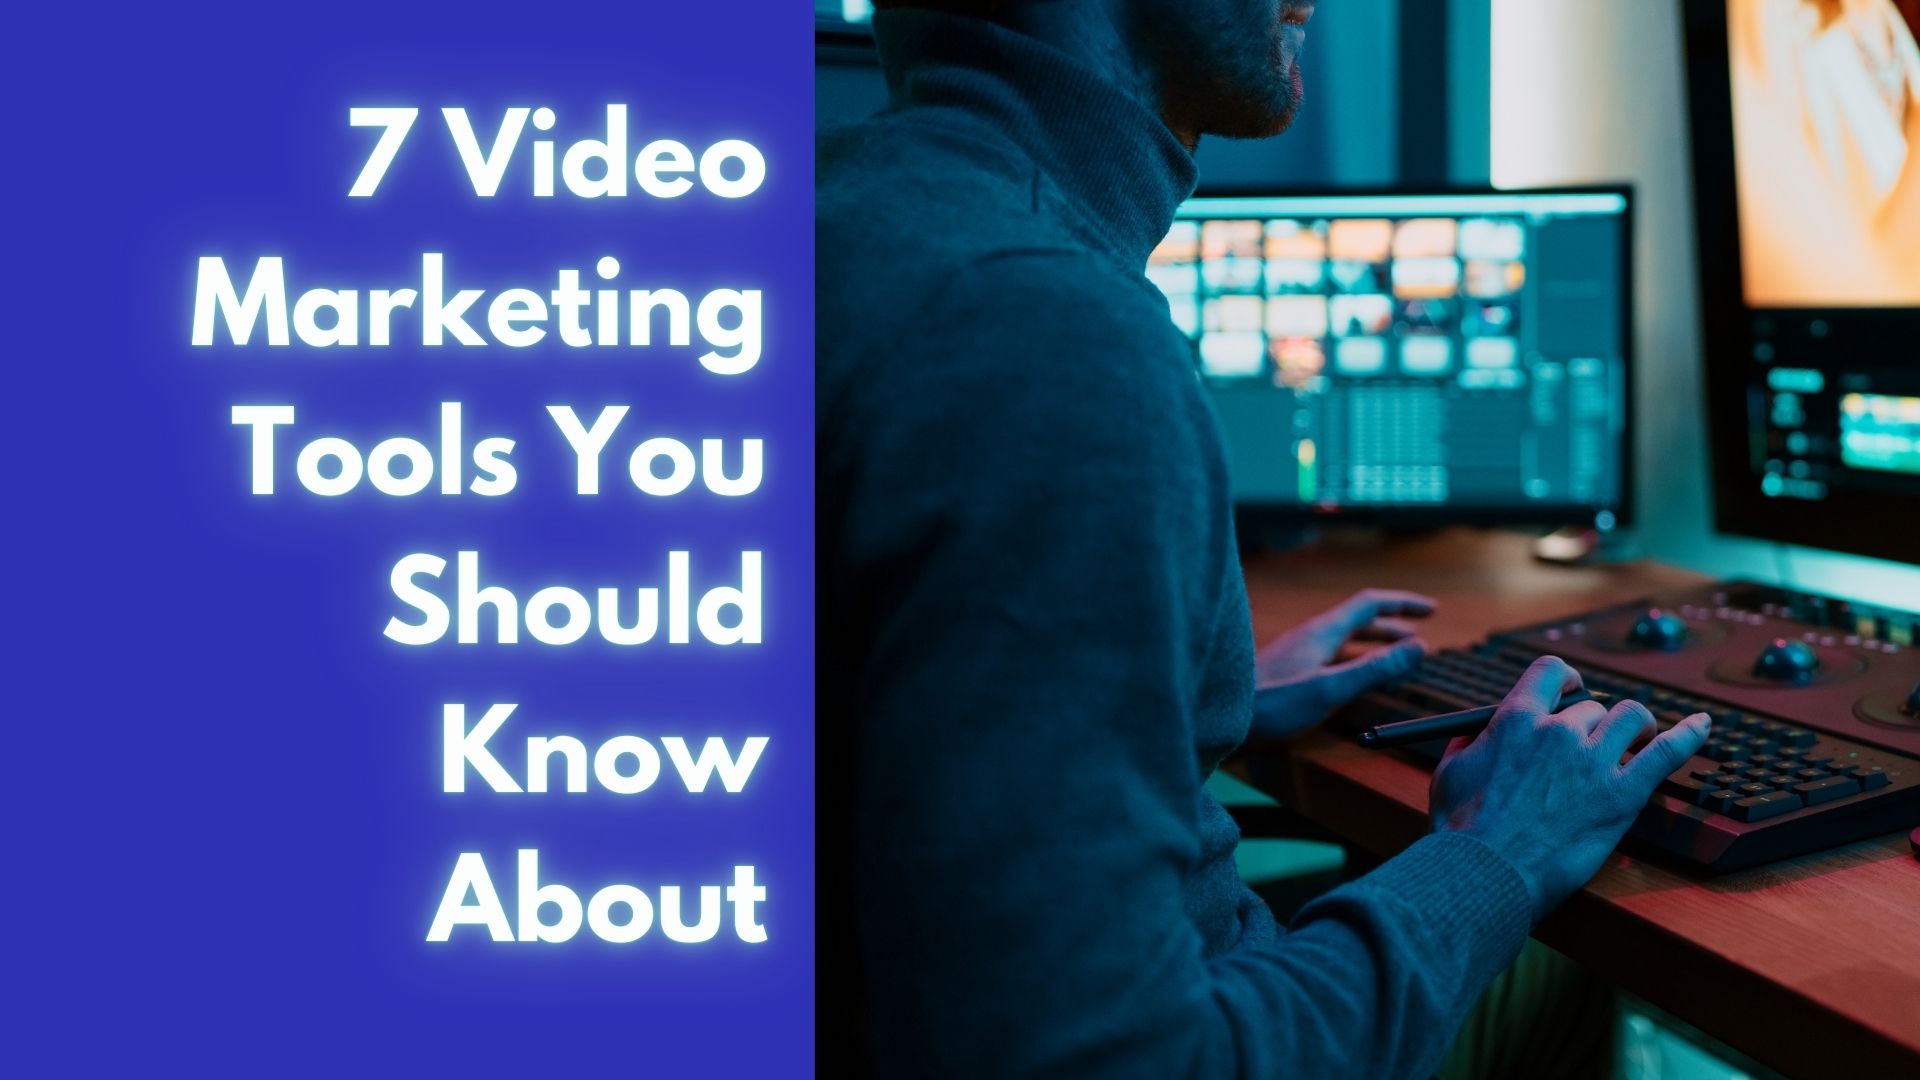 7 video marketing tools you should know about